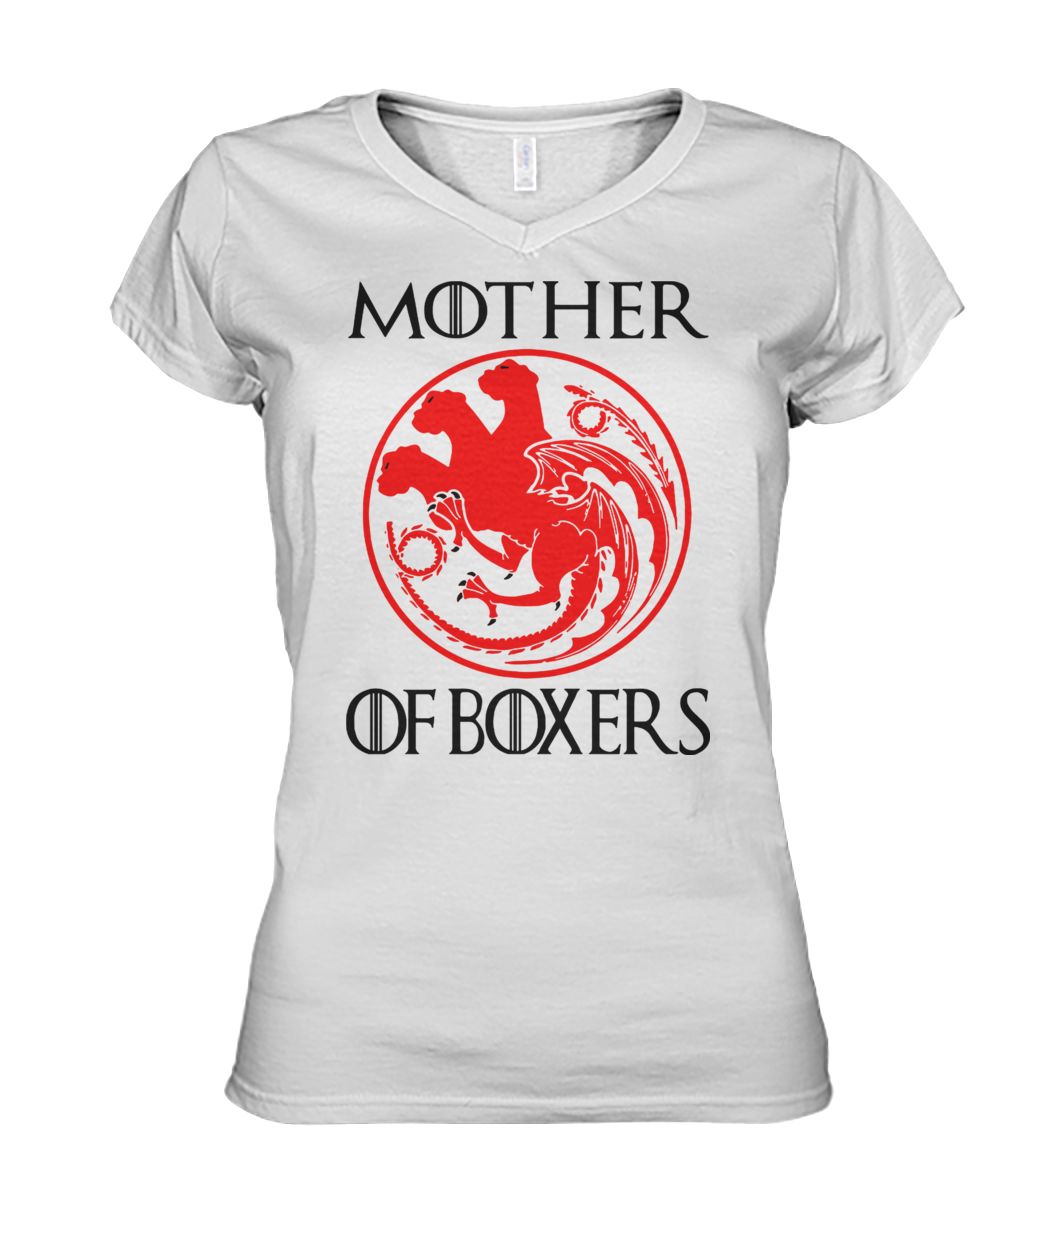 Game of thrones mother of boxers women's v-neck